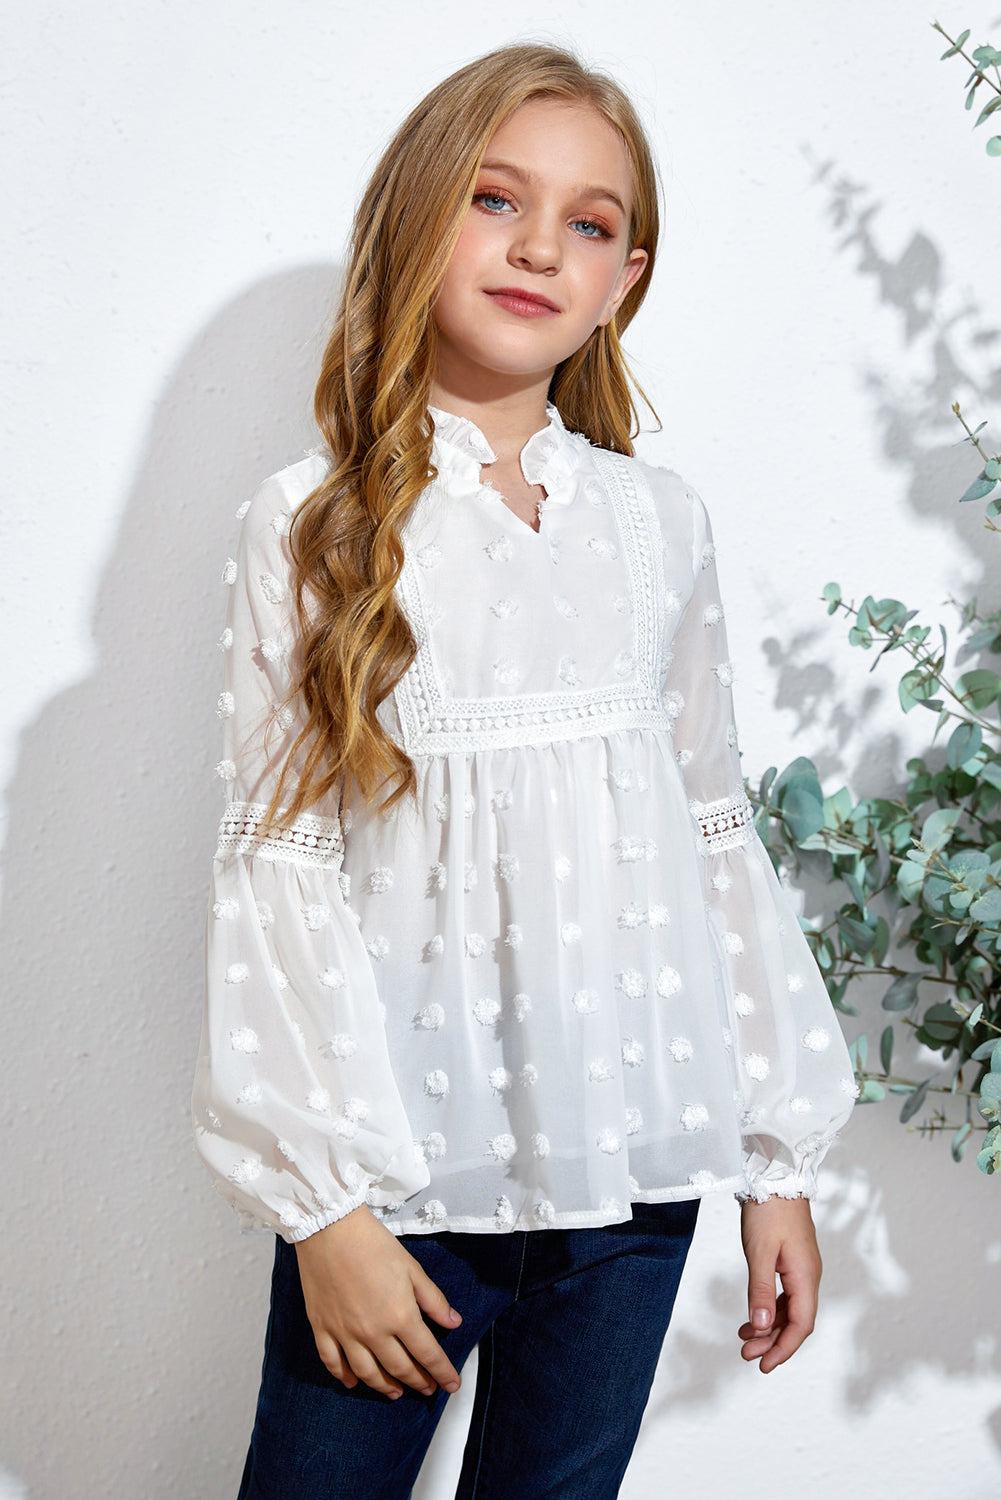 Uylee's Boutique Girls Swiss Dot Spliced Lace Notched Blouse